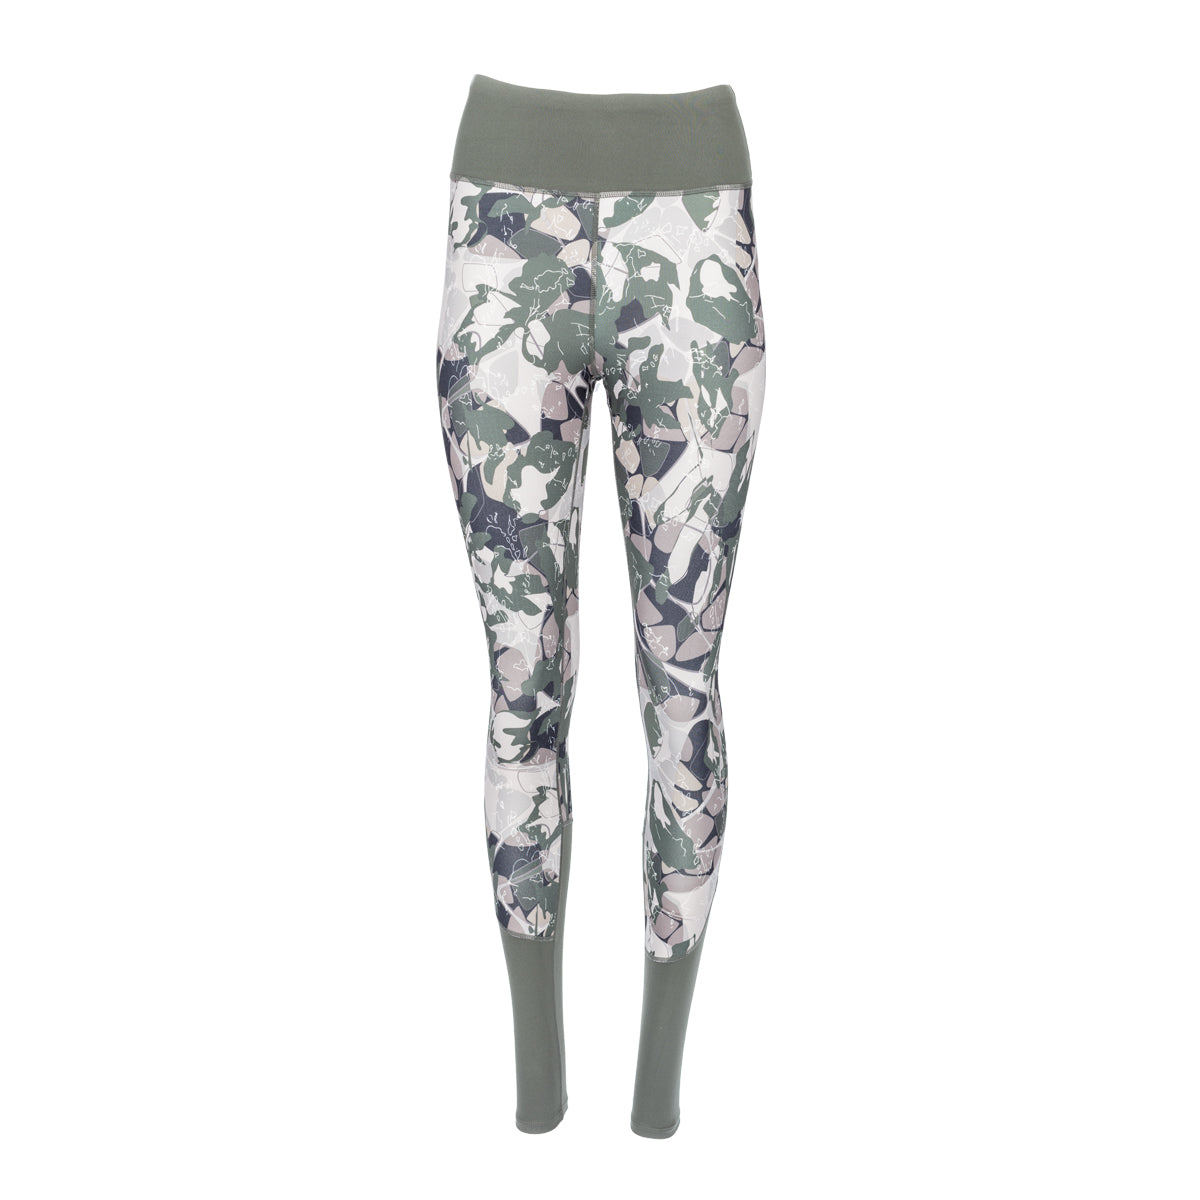 Azyre Vision Legging in  by GOHUNT | Azyre - GOHUNT Shop